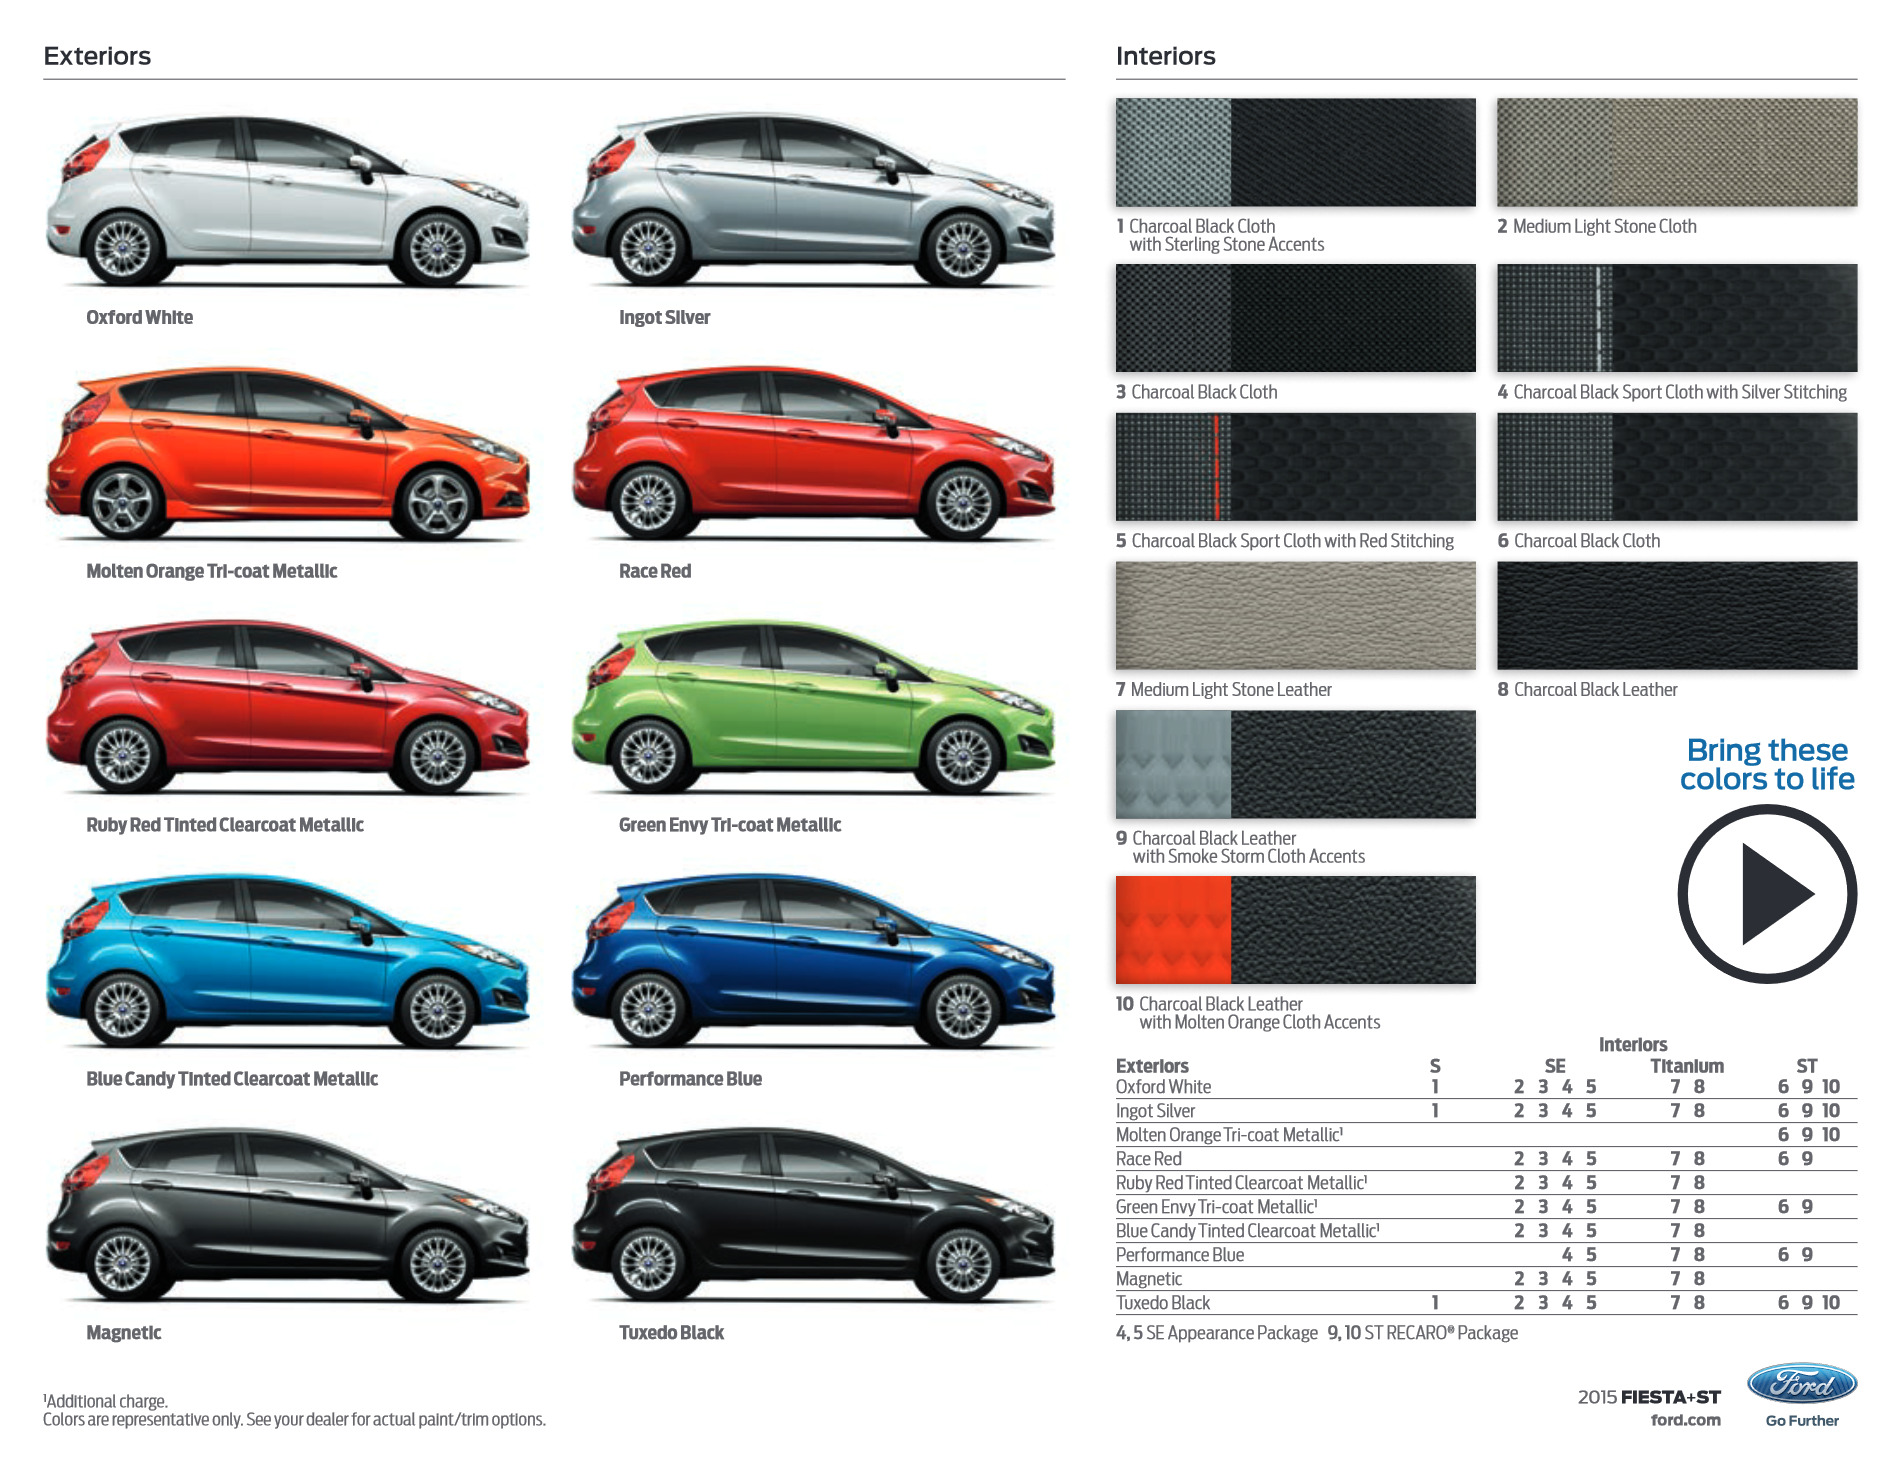 exterior color shades that the Ford Fiesta came in